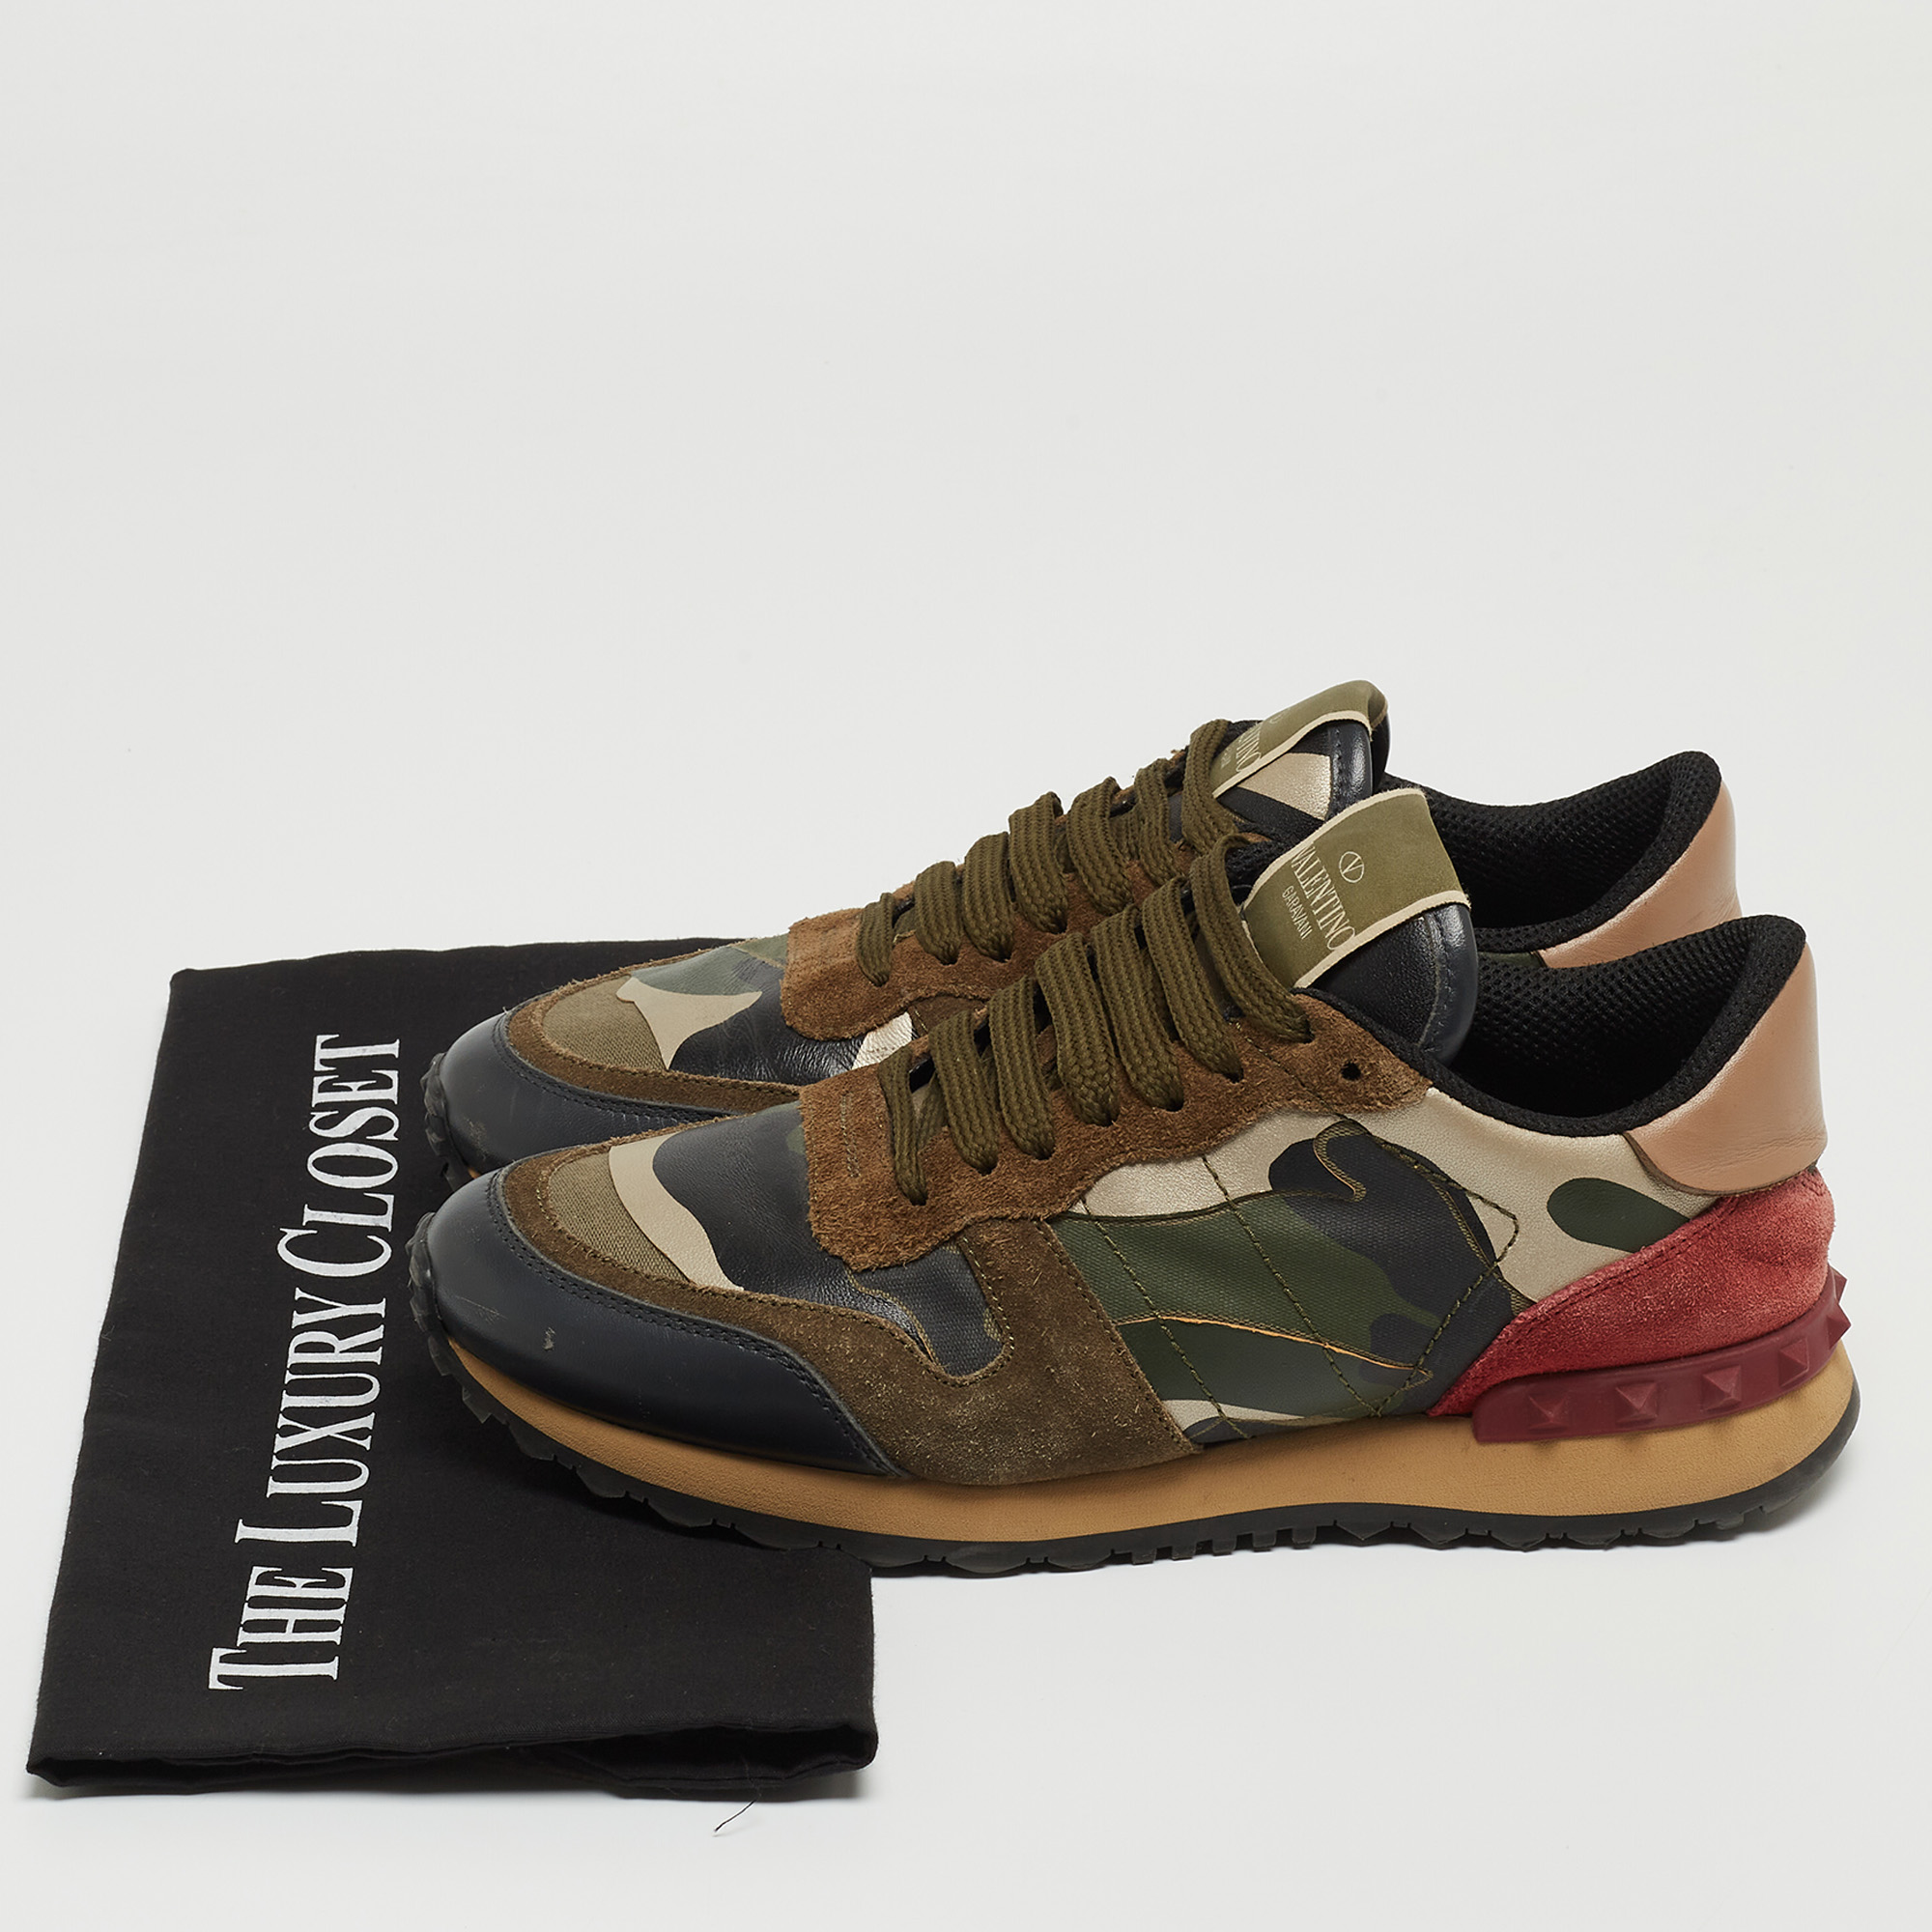 Valentino Multicolor Camouflage Print Canvas And Leather Rockrunner Sneakers Size 36